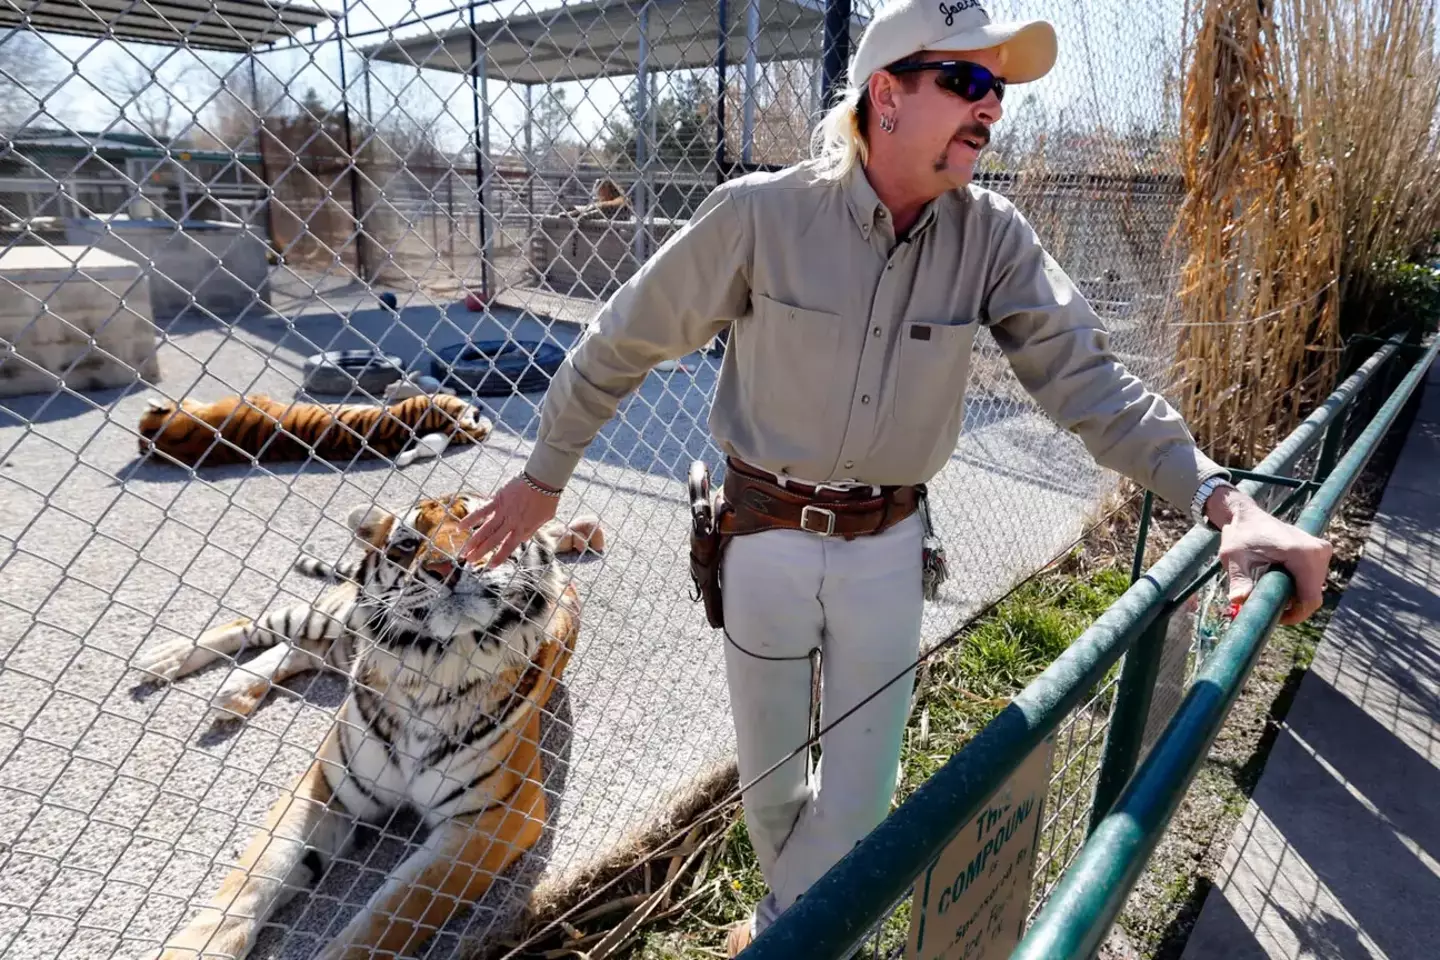 Joe Exotic rose to fame in the Netflix documentary, Tiger King.